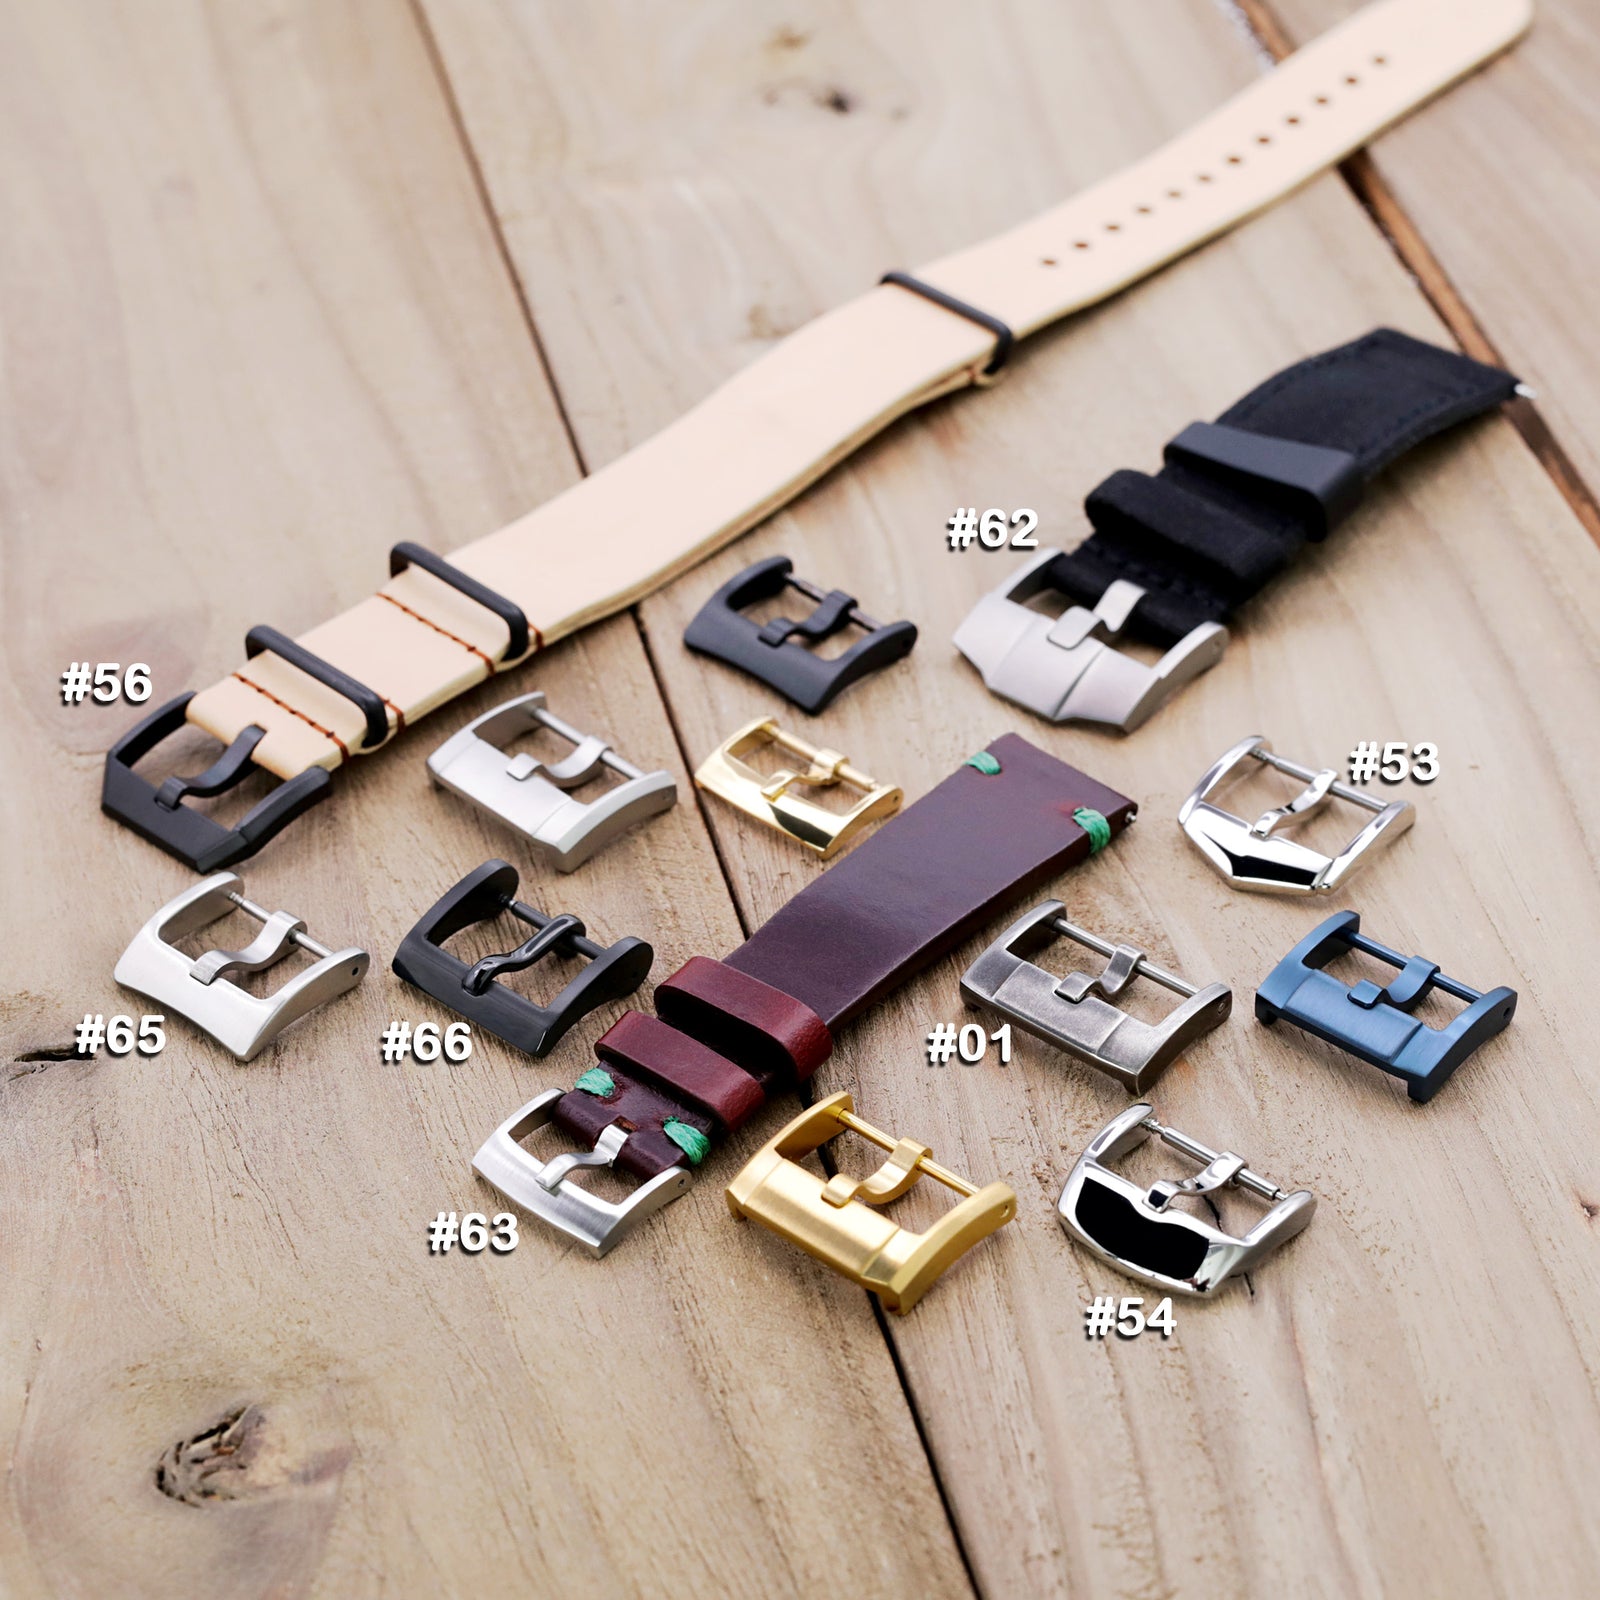 What Watch Buckle Suits Your Leather Watch Bands Best?